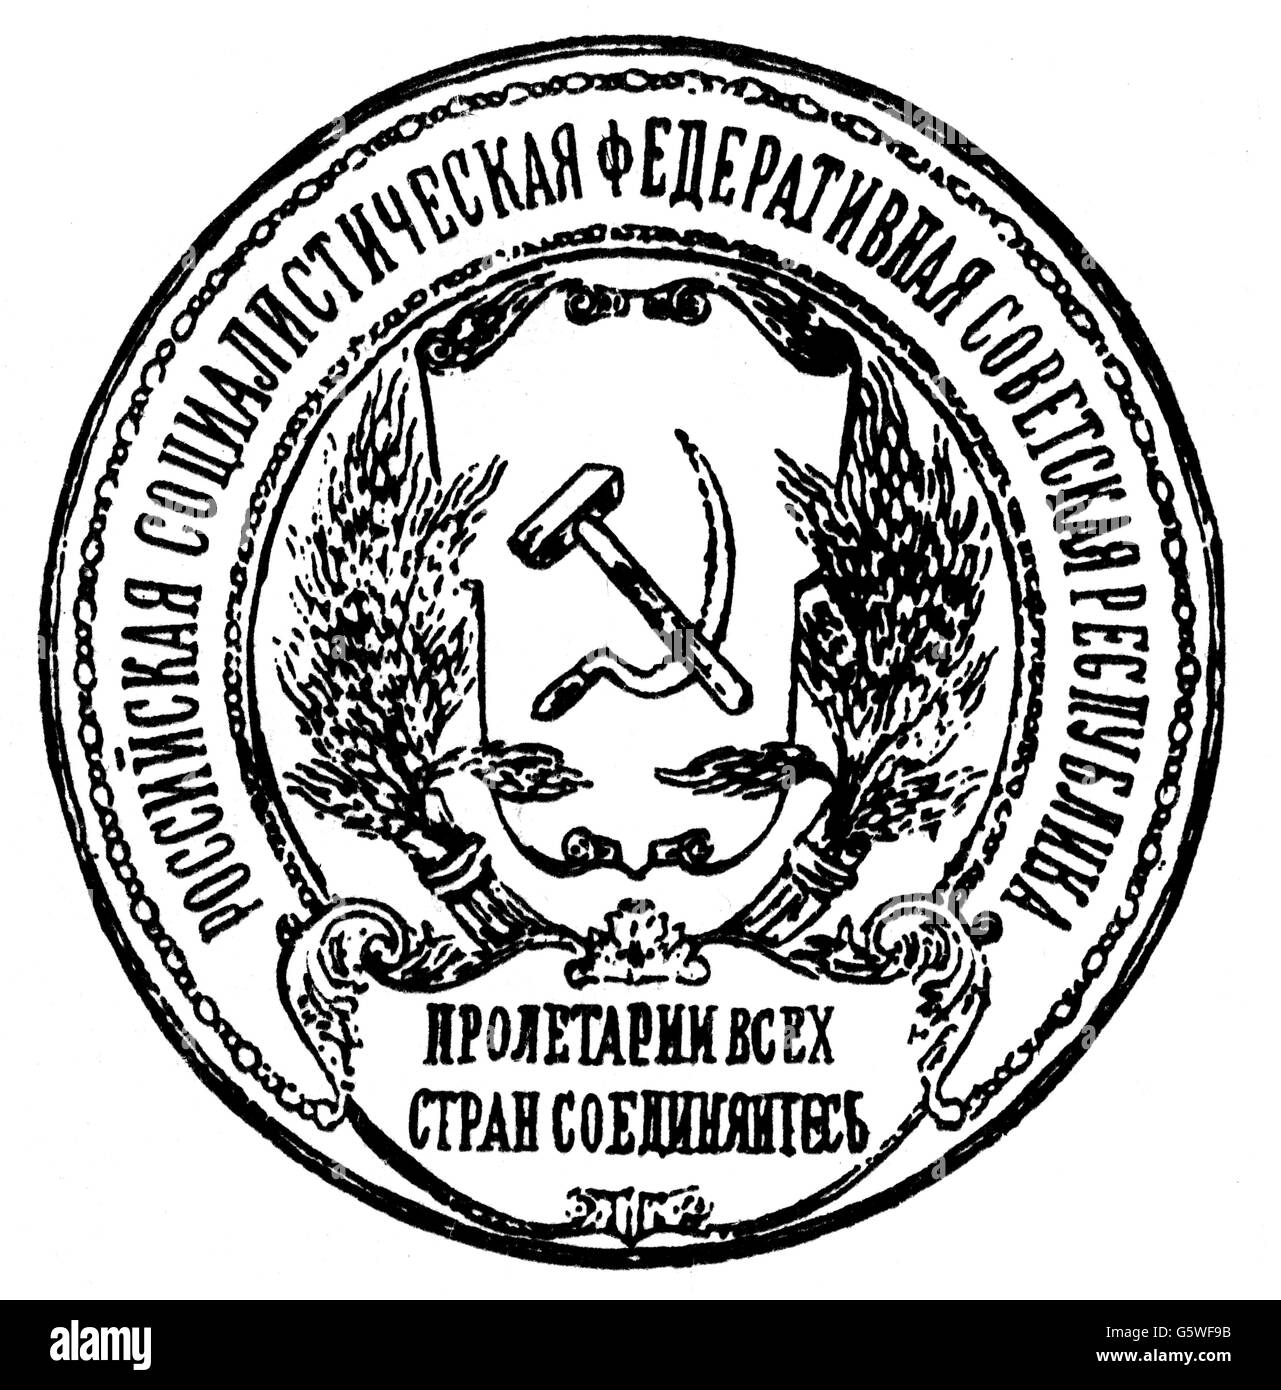 heraldry, coat of arms, Russia, state coat of arms of the Russian Socialistic Federative Soviet Republic (RSFSR), 1918 - 1922, Additional-Rights-Clearences-Not Available Stock Photo